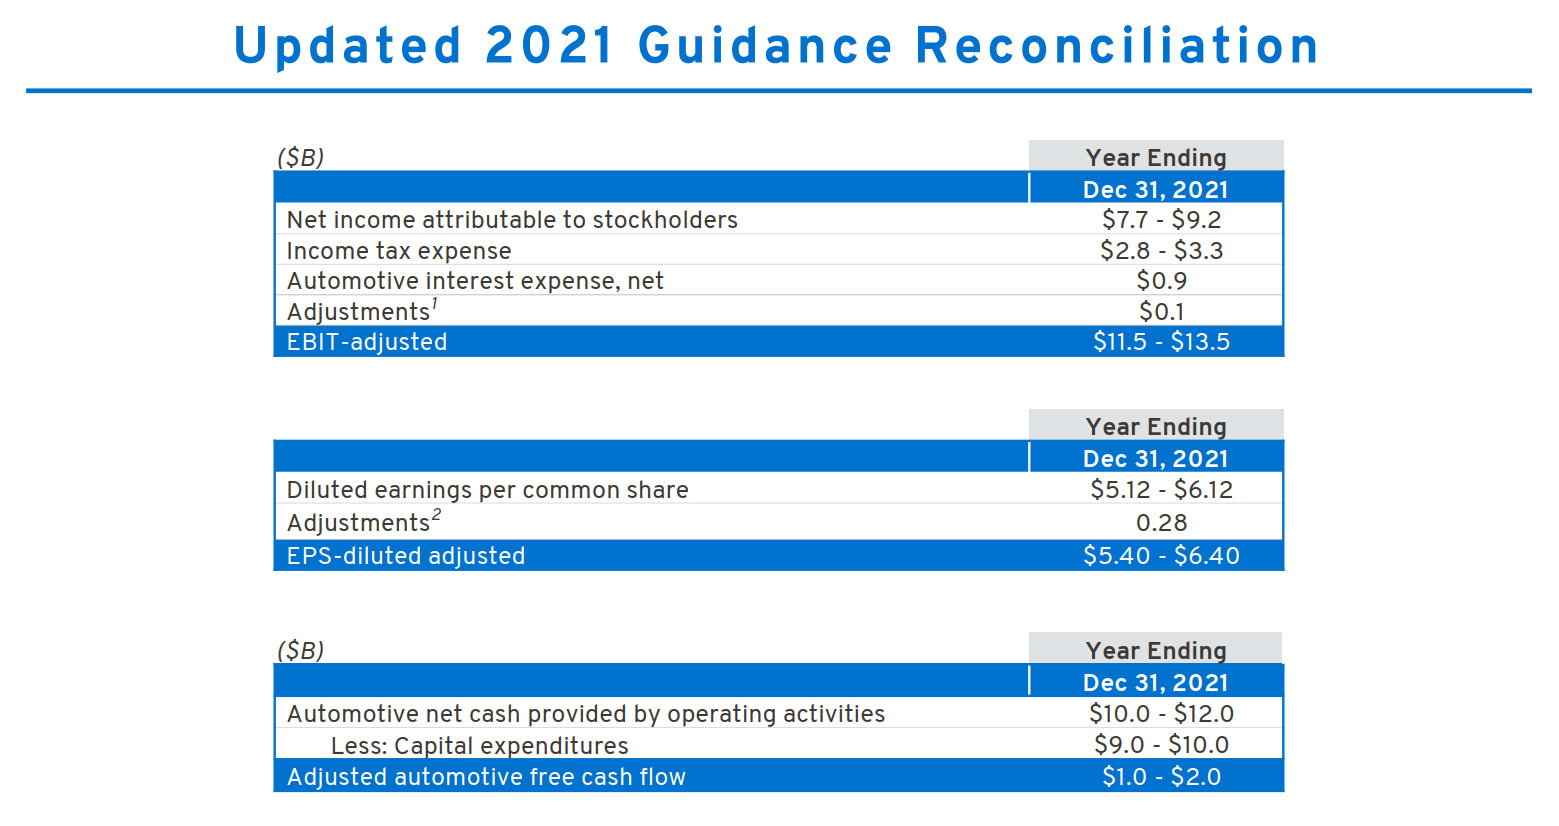 GM's guided outlook for FY2021